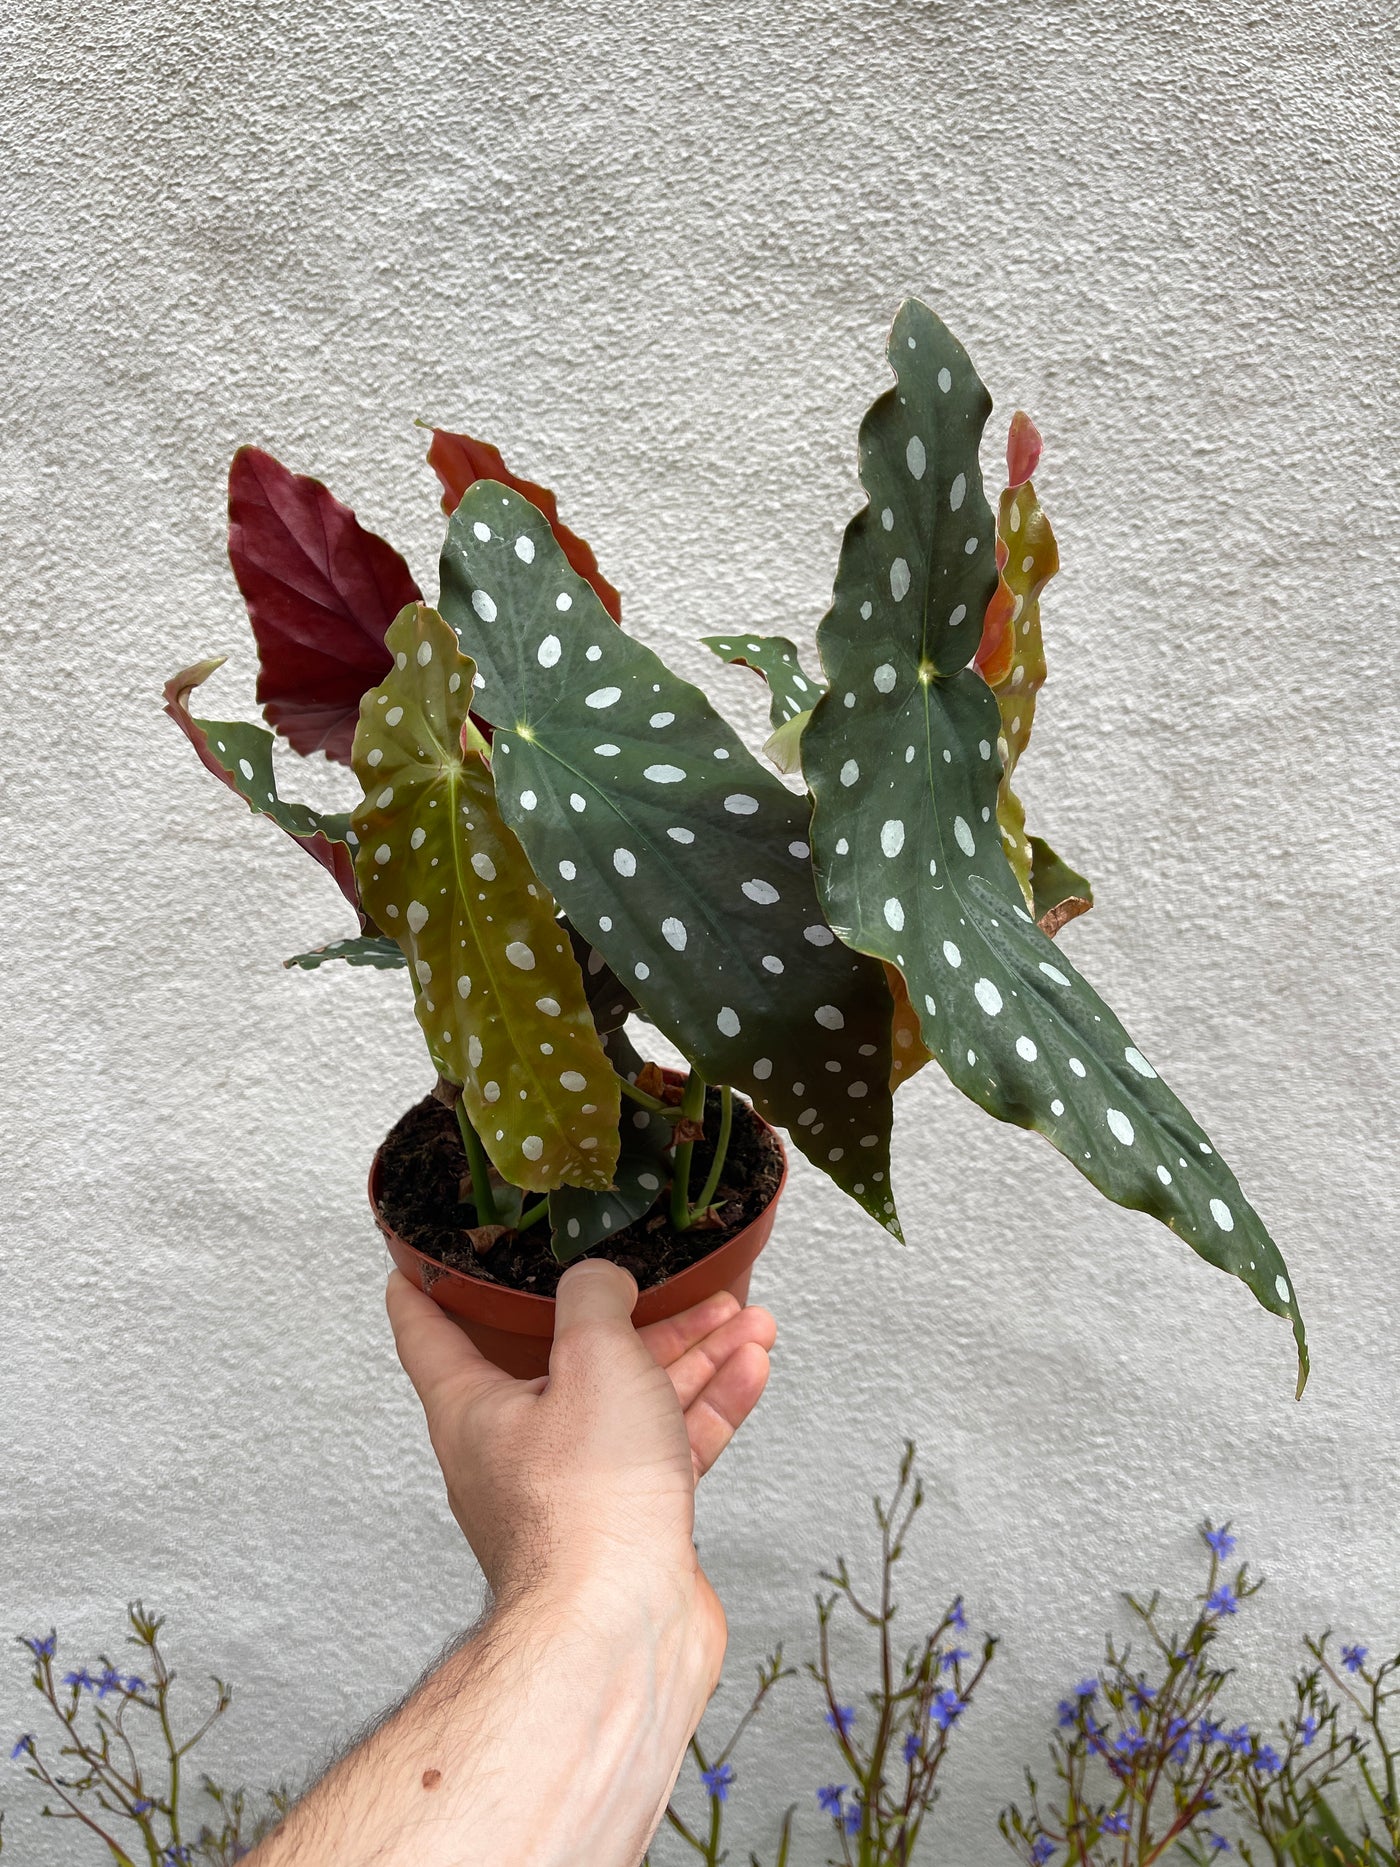 Large and Tall Polka Dot Angel Wing Begonia for sale - Plant Vault Encinitas California